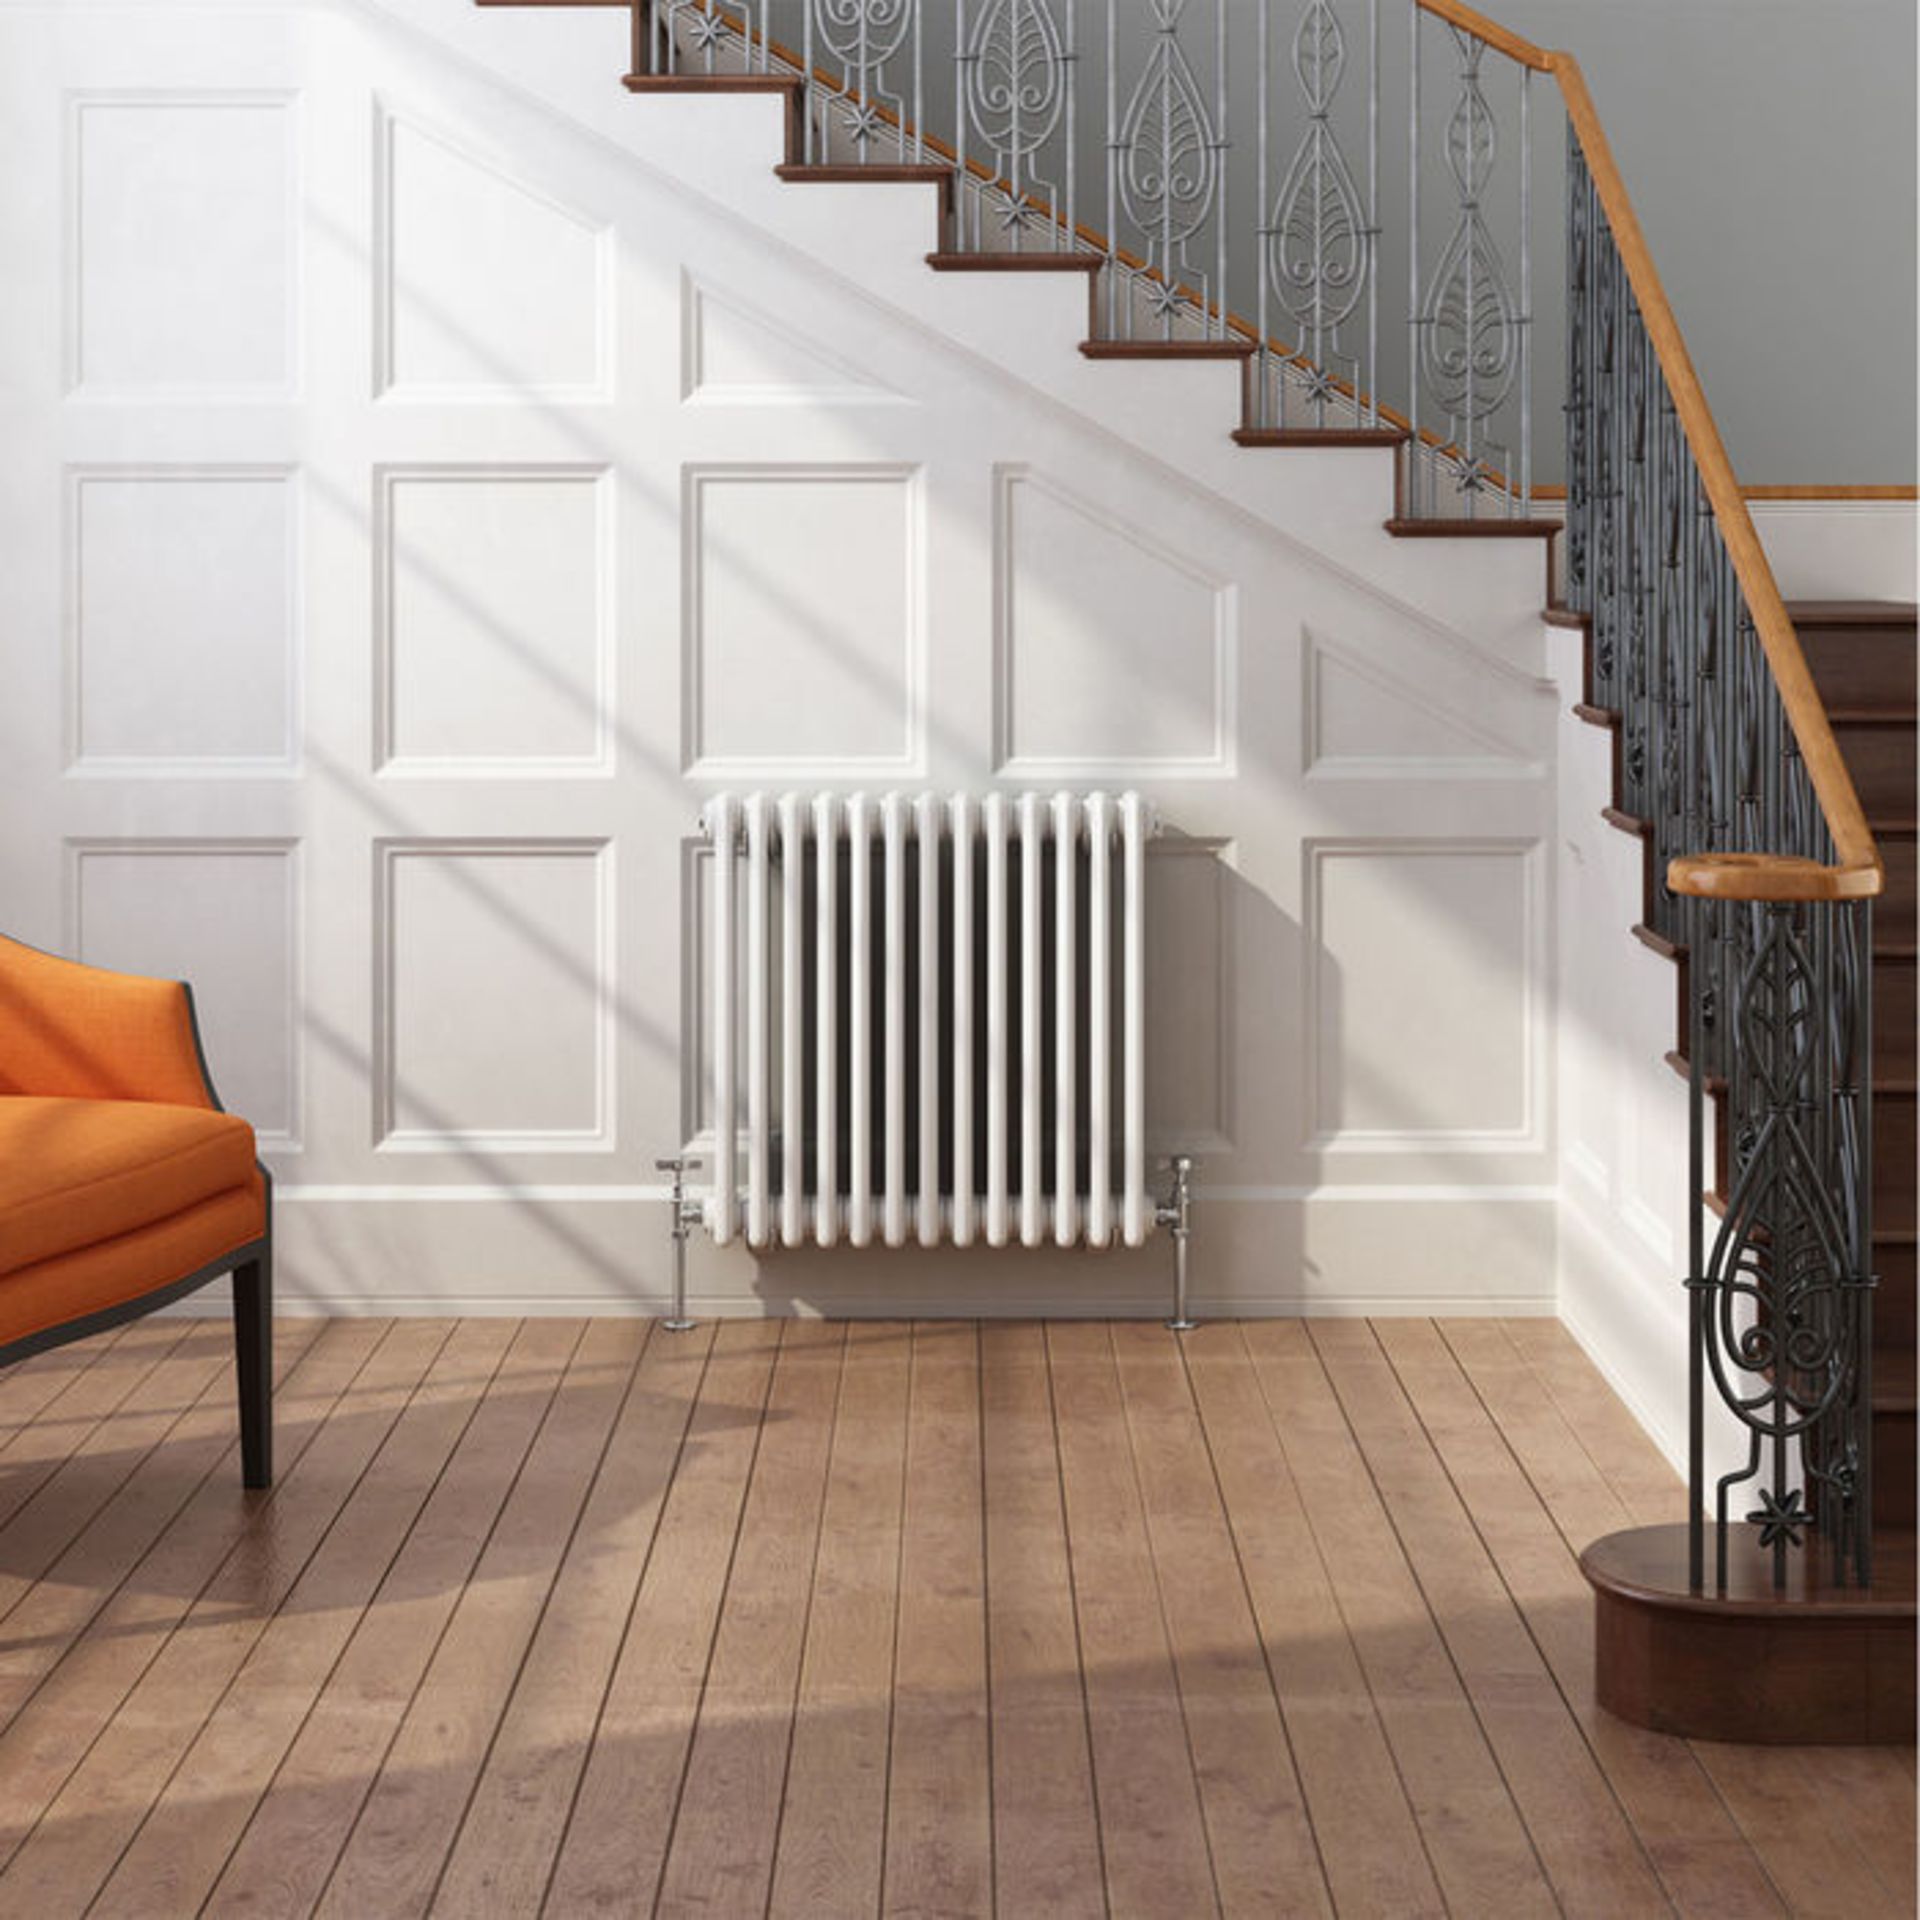 (OS263) 600x603mm White Double Panel Horizontal Colosseum Traditional Radiator. RRP £395.99. Made - Image 2 of 4